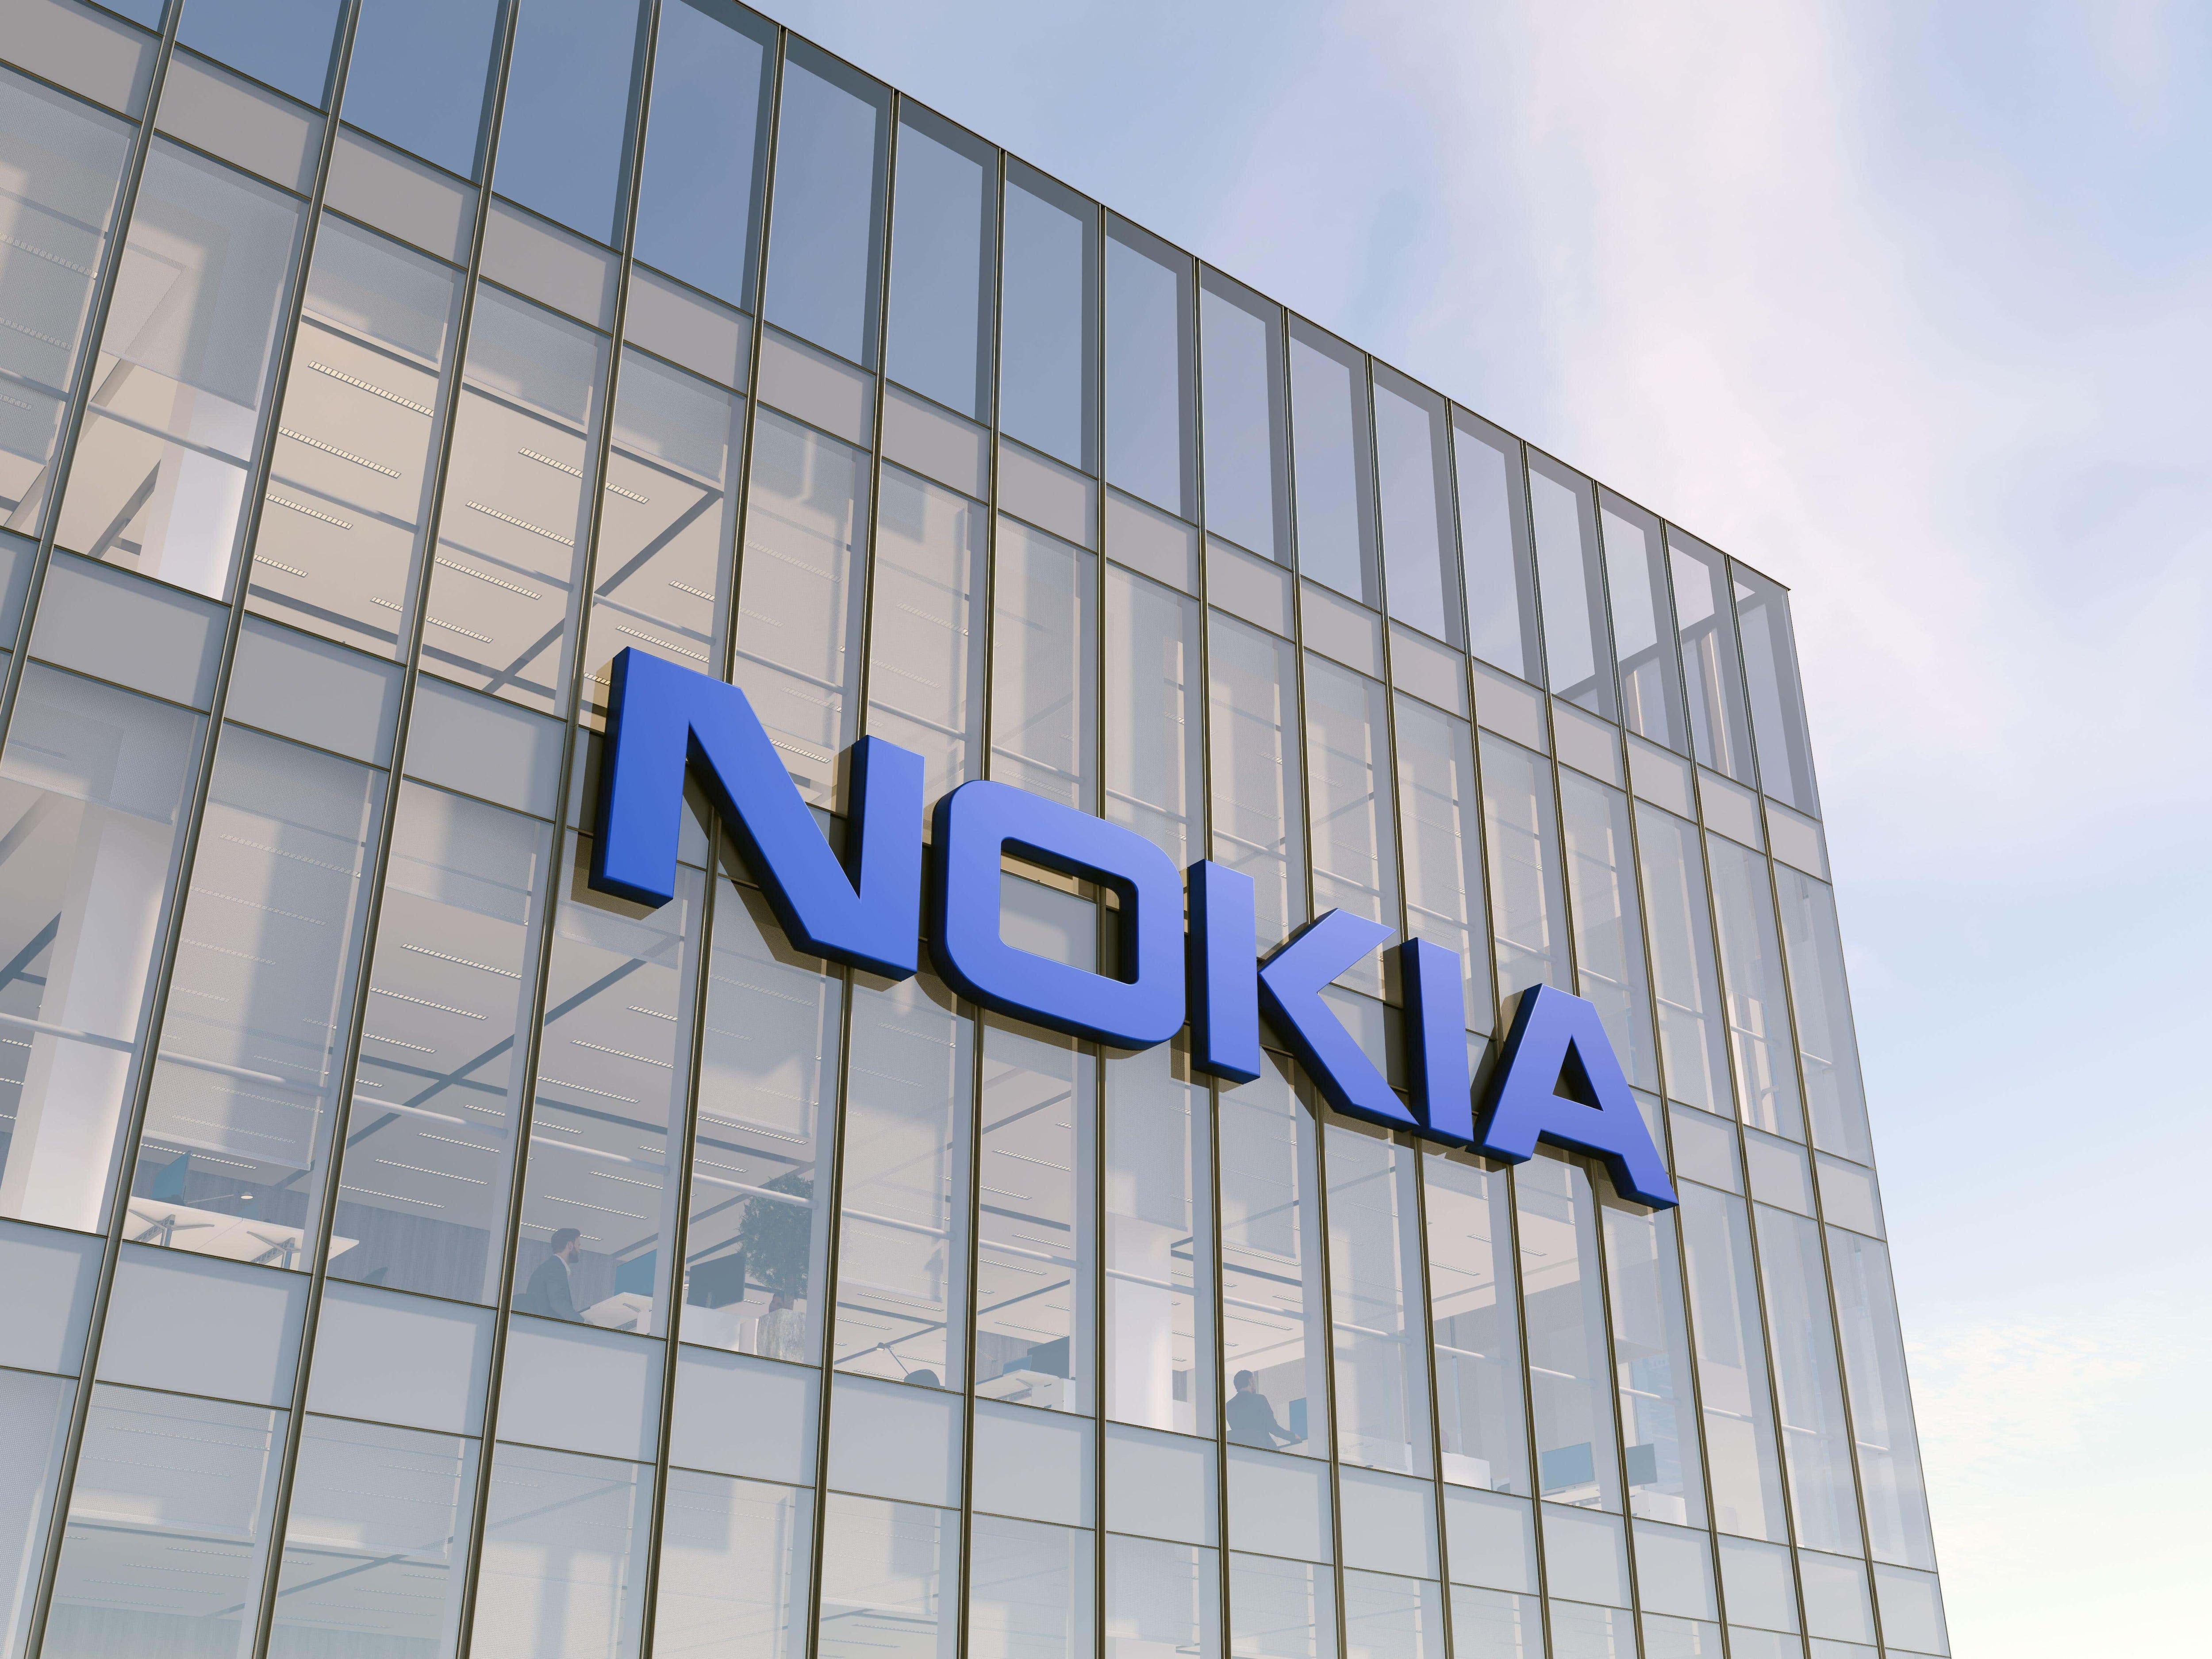 Nokia sees double-digit fall in profit and sales due to weak 5G market